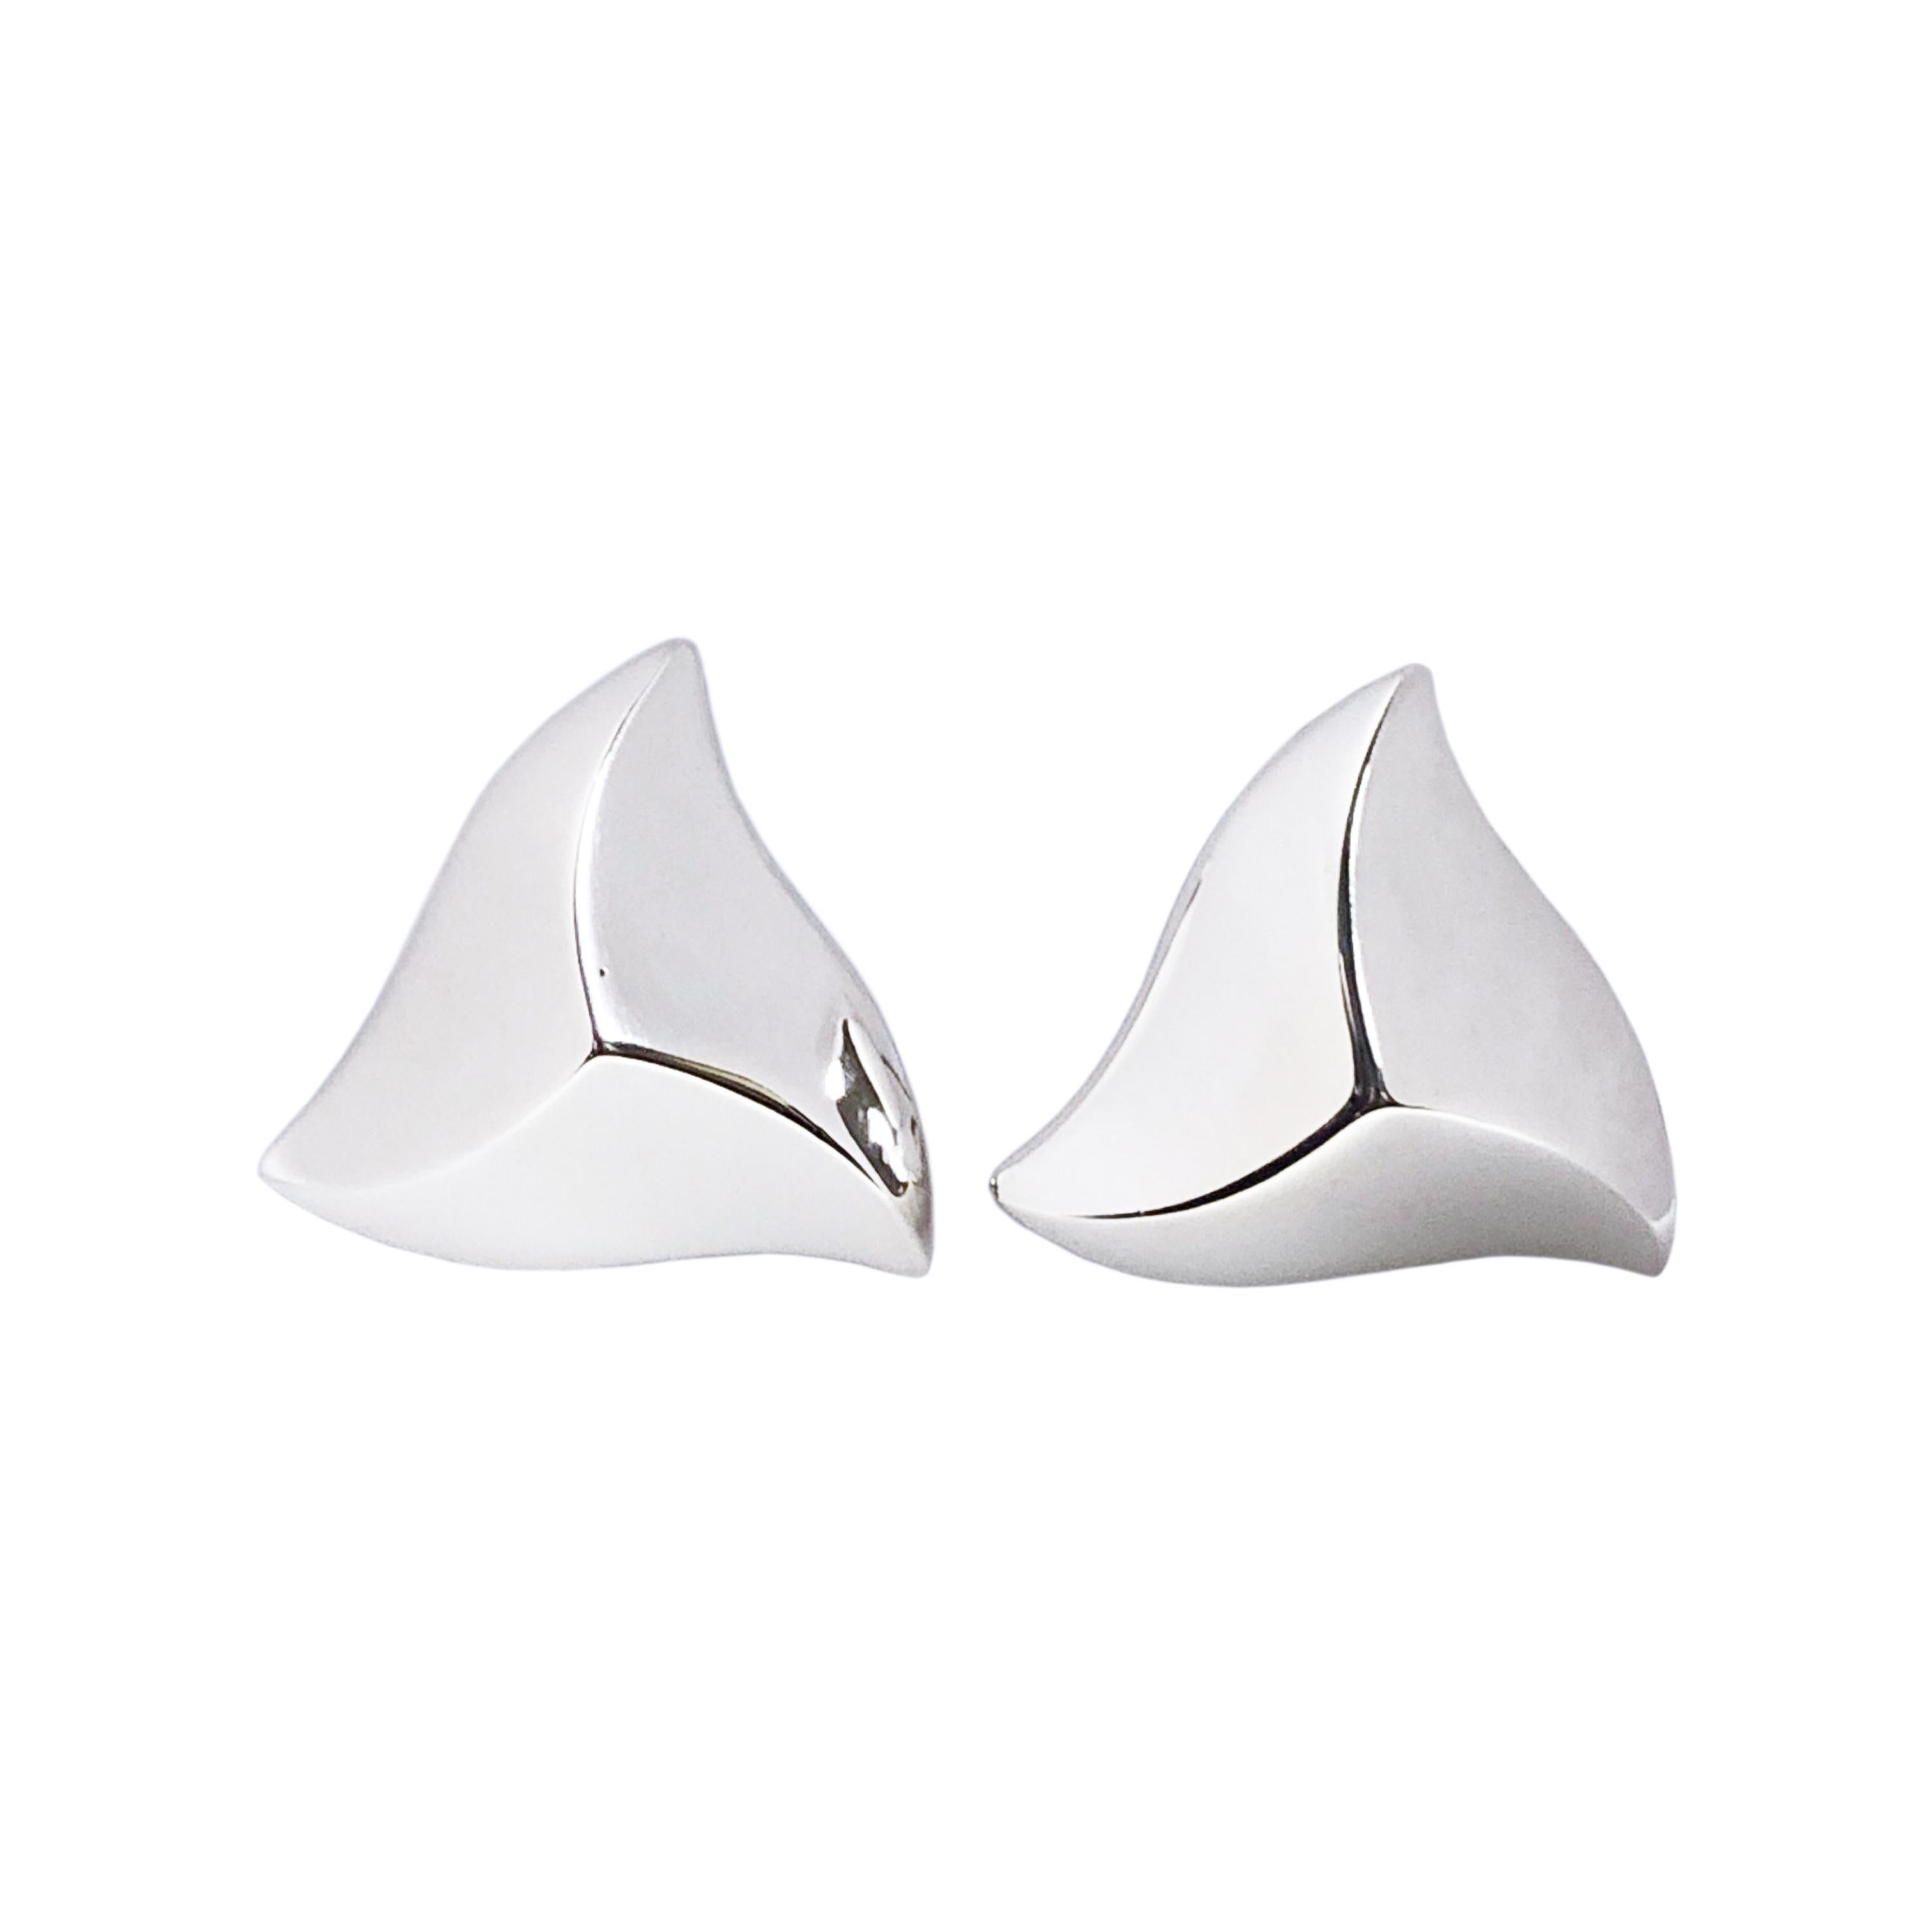 Circa 1980s Angela Cummings Sterling Silver Earrings, in a stylized Star shape, measuring 1 1/4 inch in diameter and 1/2 inch thick. Having Omega clip backs to which a post can be easily added if desired. These are in New unworn condition and come